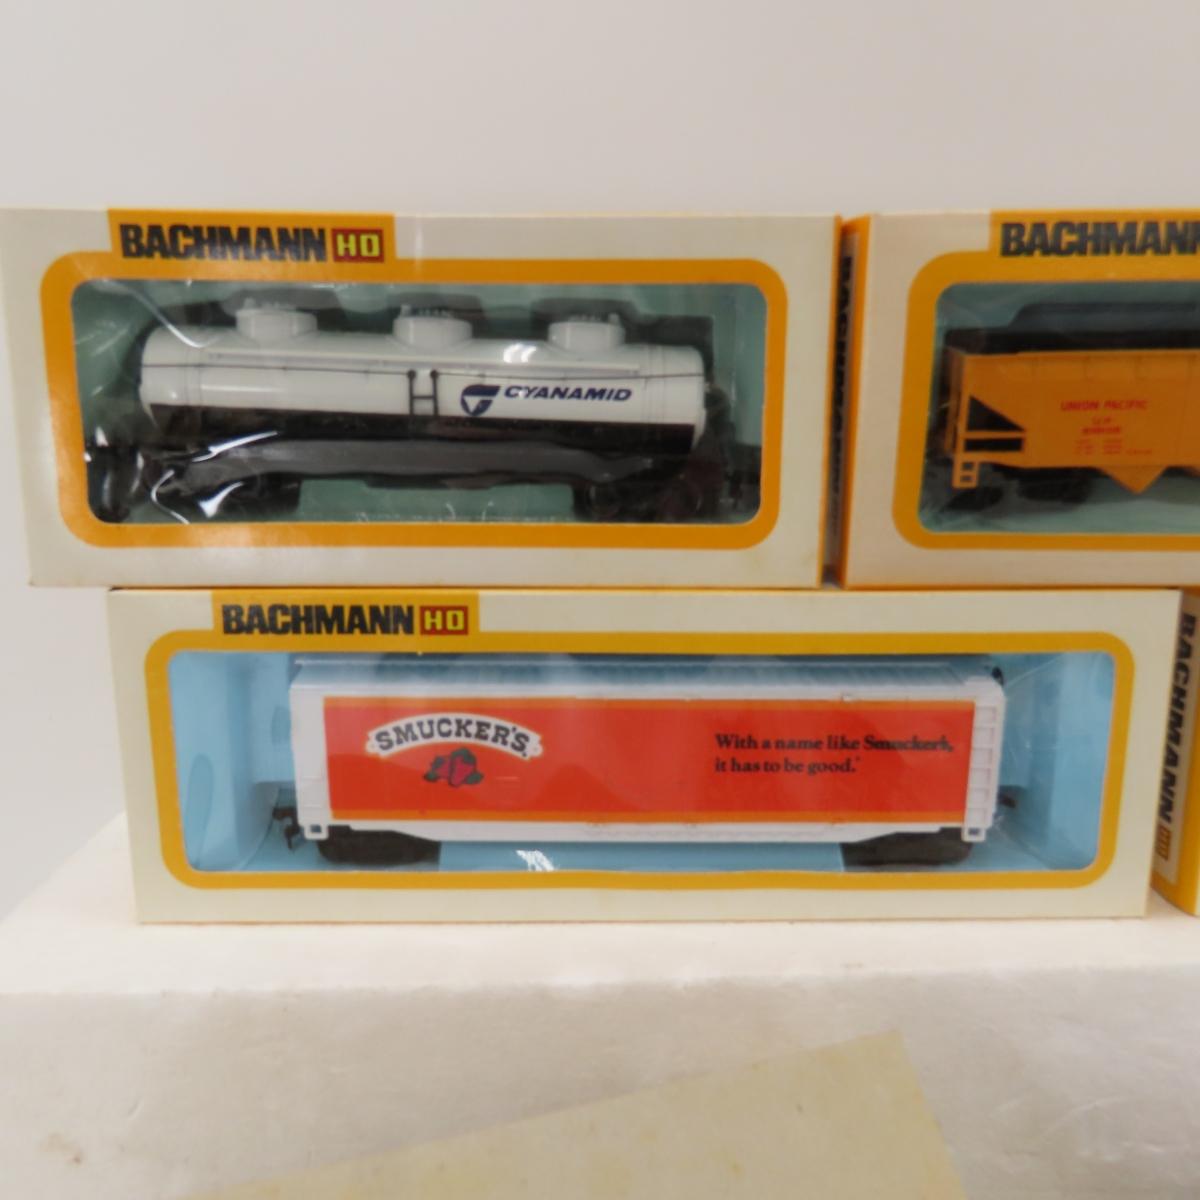 Bachmann HO Scale Train Set- Some in Boxes